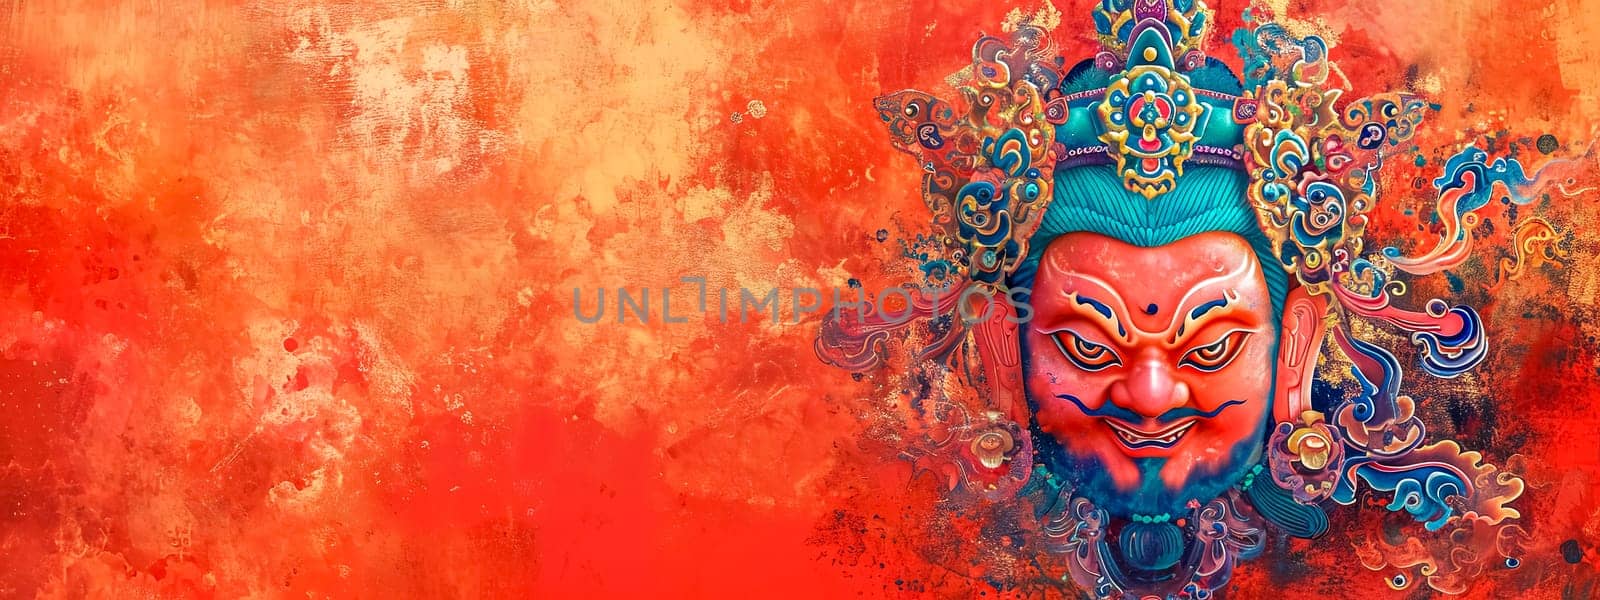 Vibrant Tibetan mask art on fiery textured background, banner with copy space by Edophoto